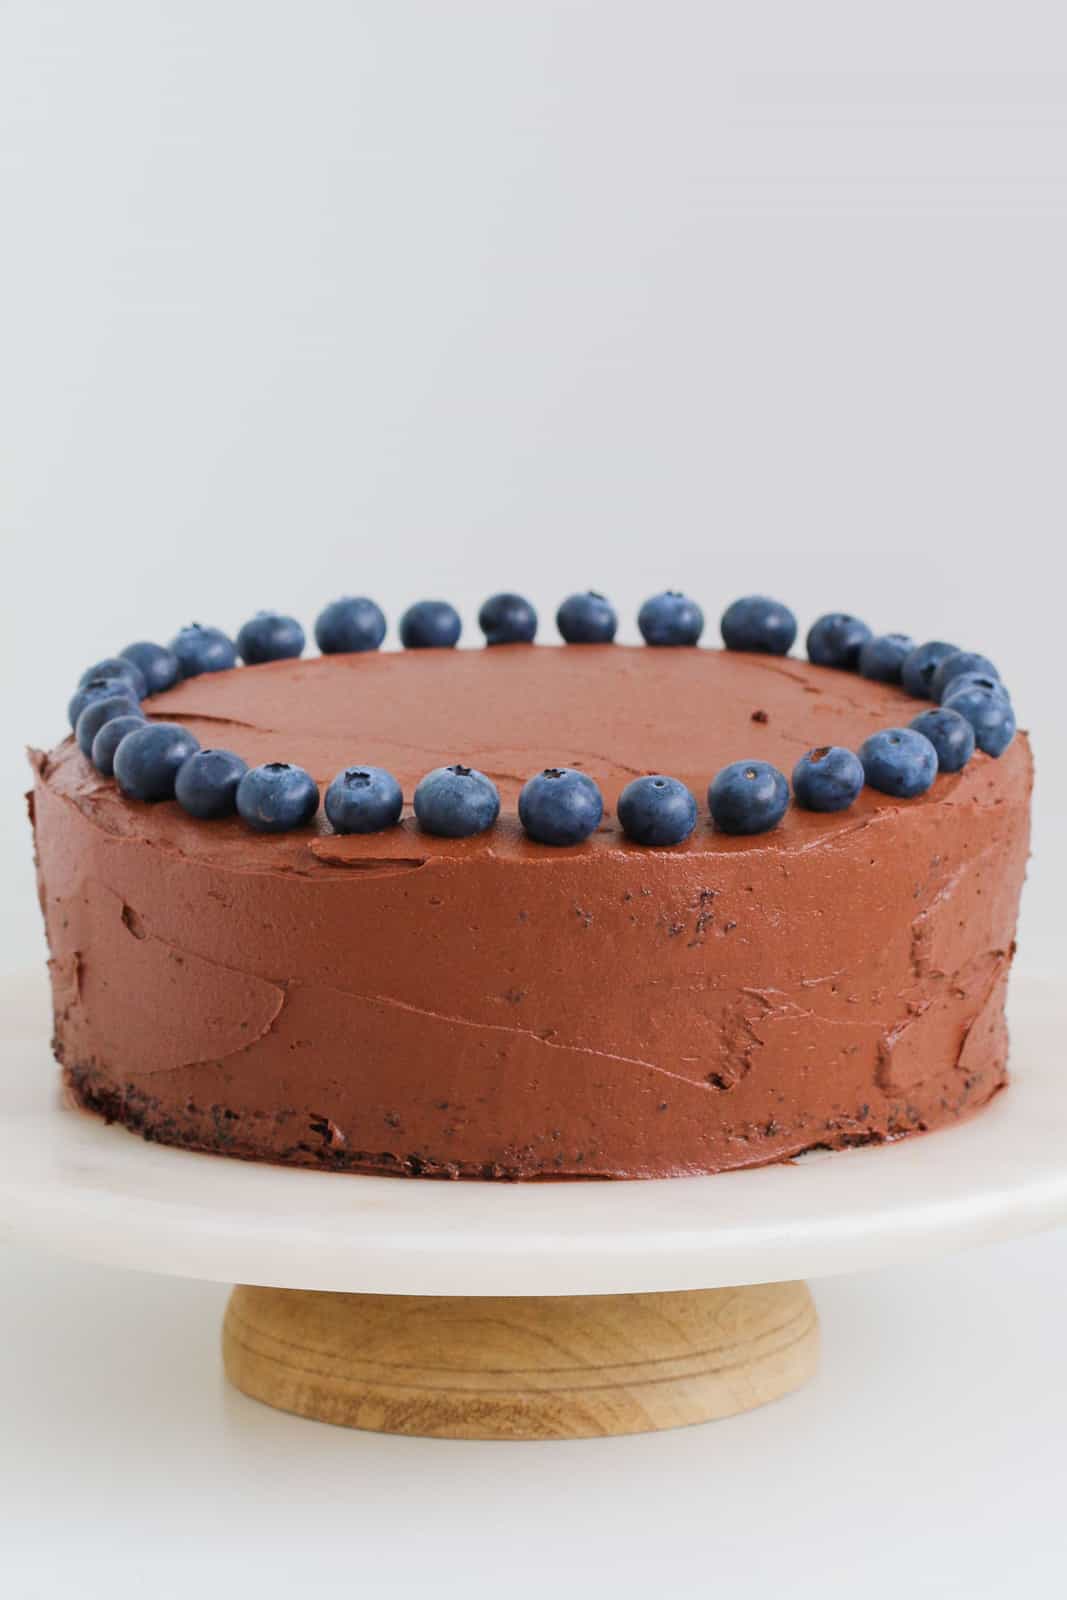 A round chocolate cake on a cake stand decorated with chocolate frosting and blueberries.